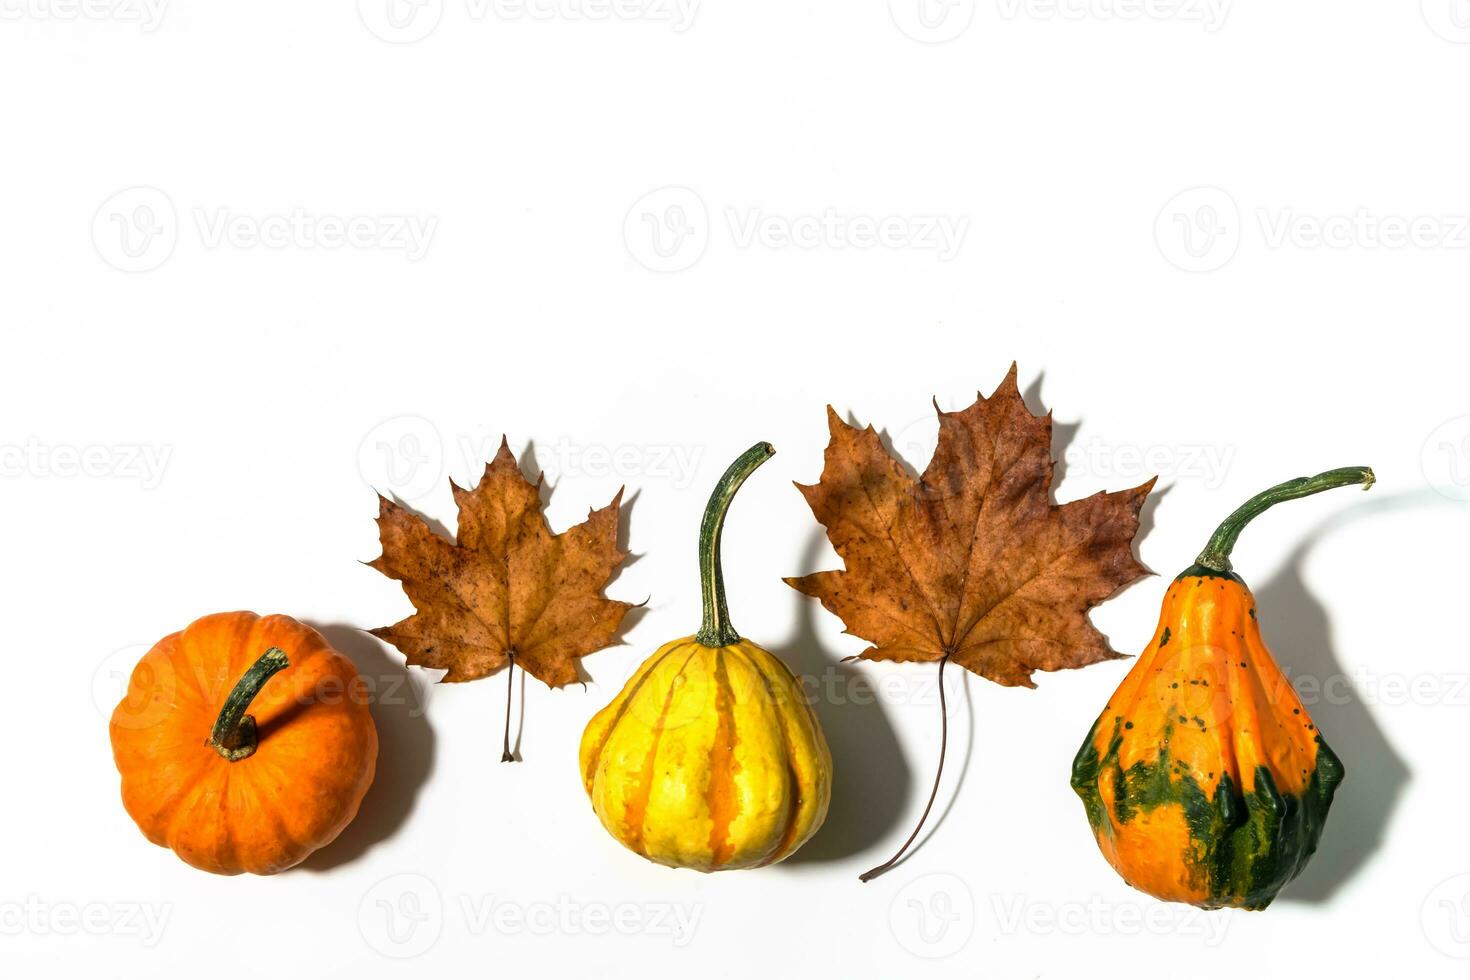 Three different pumpkins on a white background photo